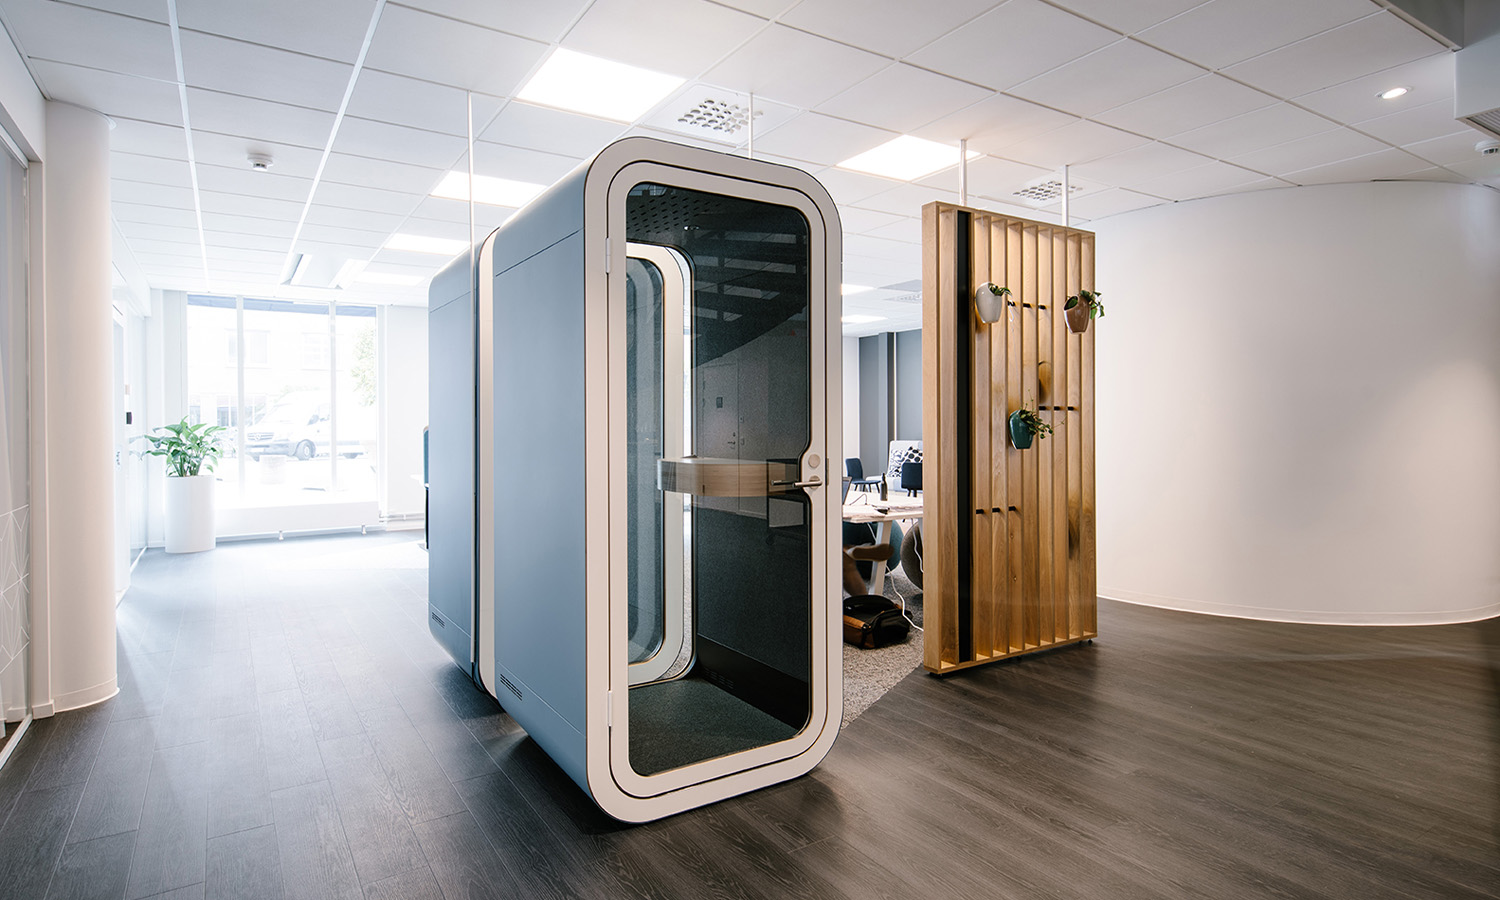 Framery O office phone booth in an open-plan office setting.